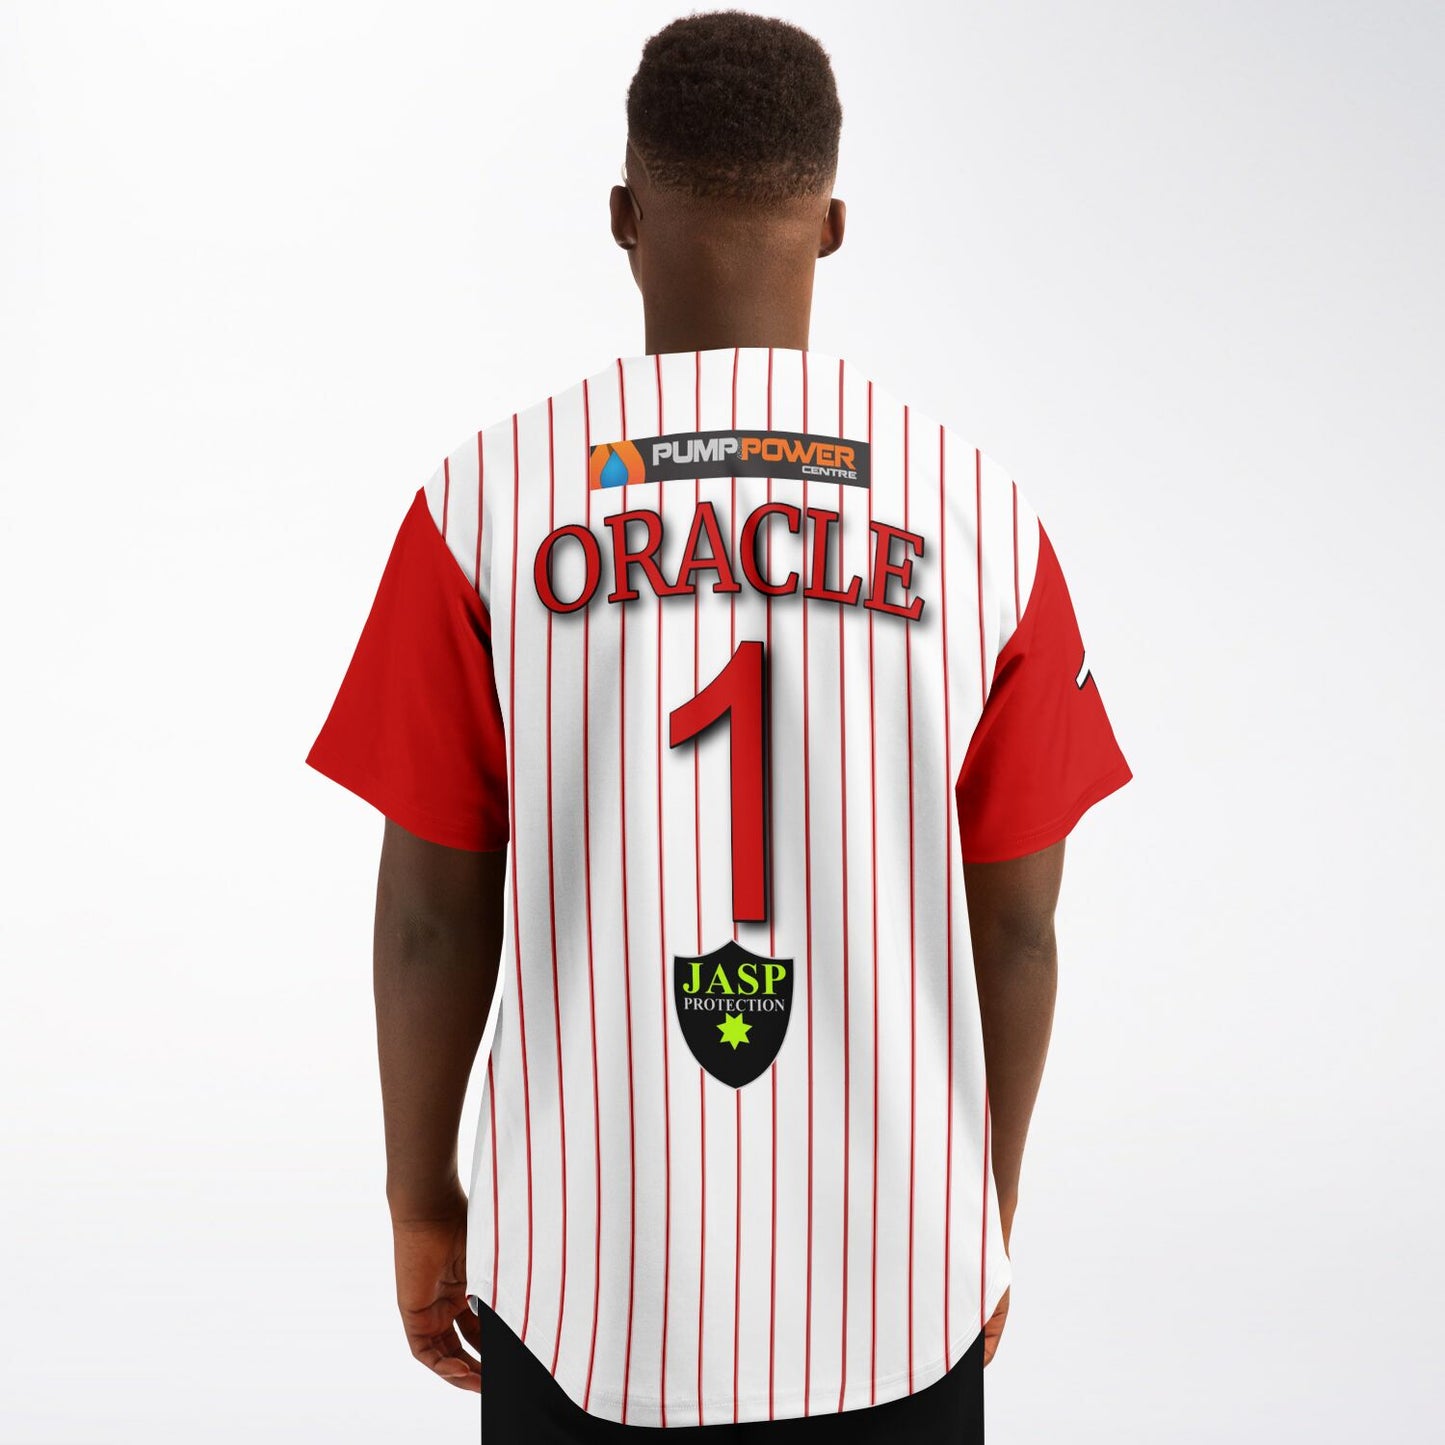 Rex Oracle Williams #1 Demons Baseball Jersey - Home